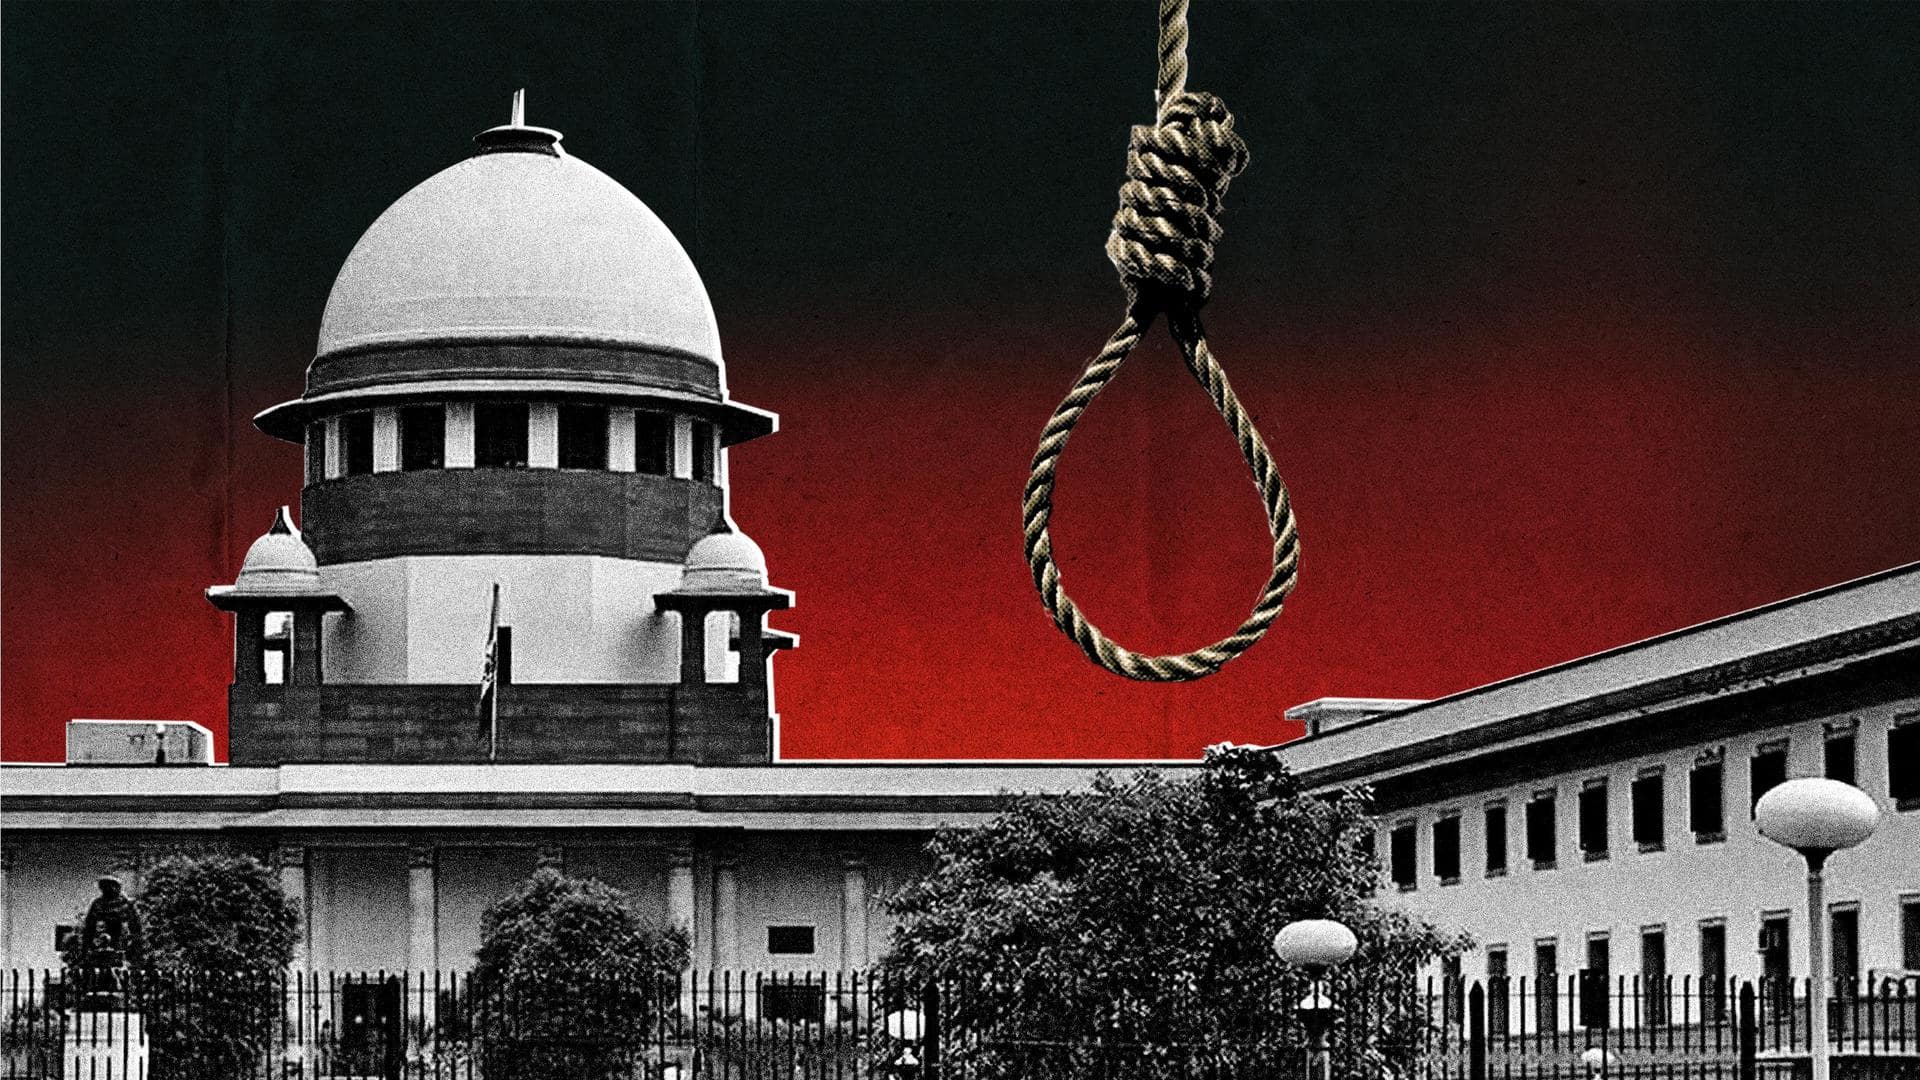 Centre looking for 'less painful' alternative to hanging execution method